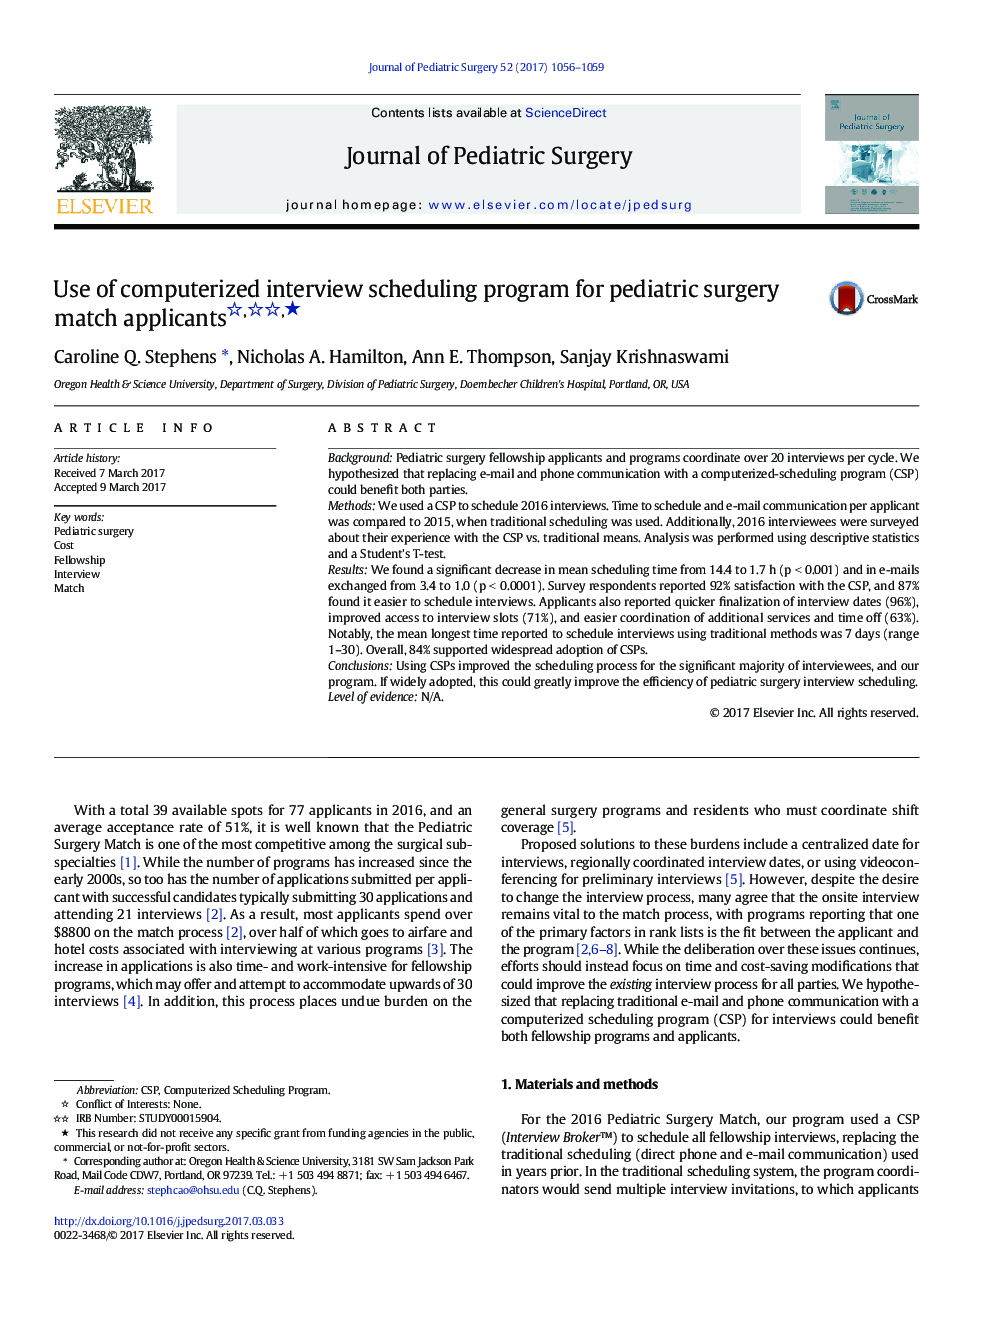 Practice ManagementUse of computerized interview scheduling program for pediatric surgery match applicantsâ